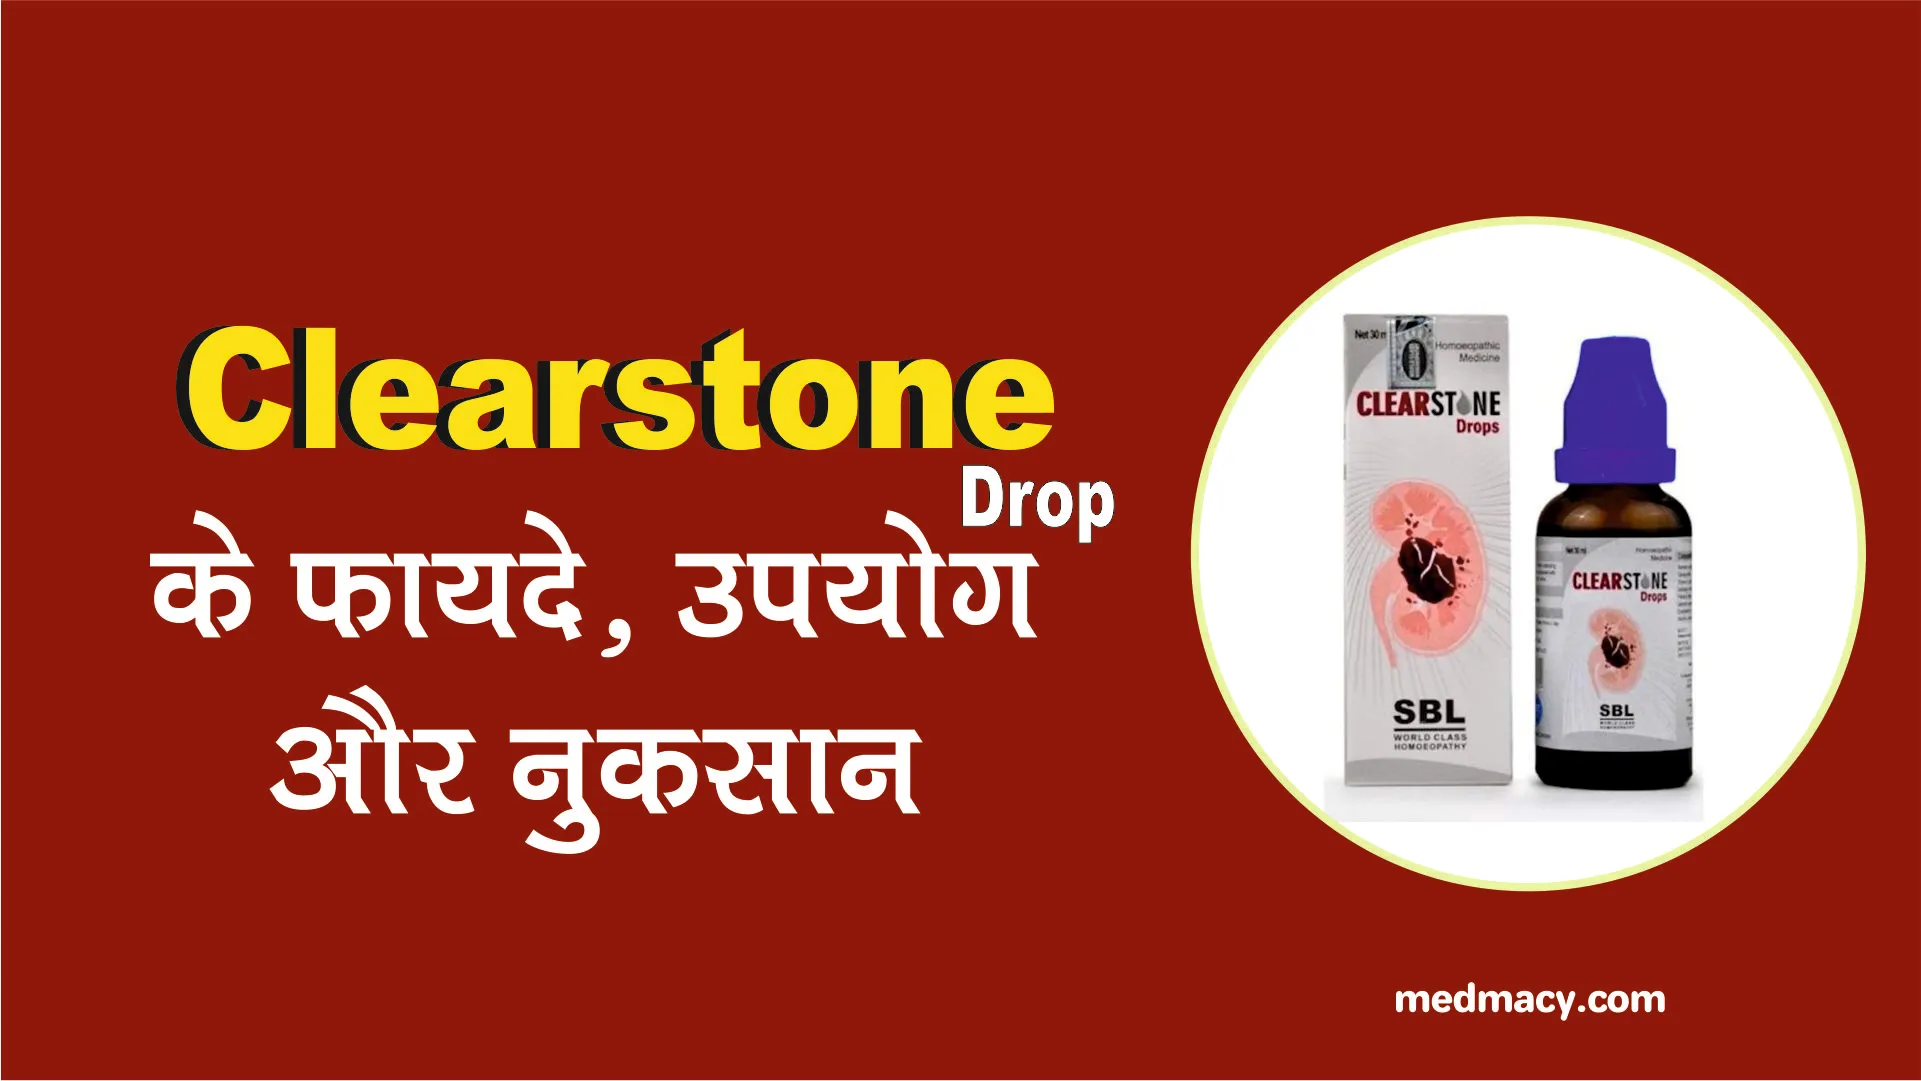 Clearstone Drops Uses in Hindi